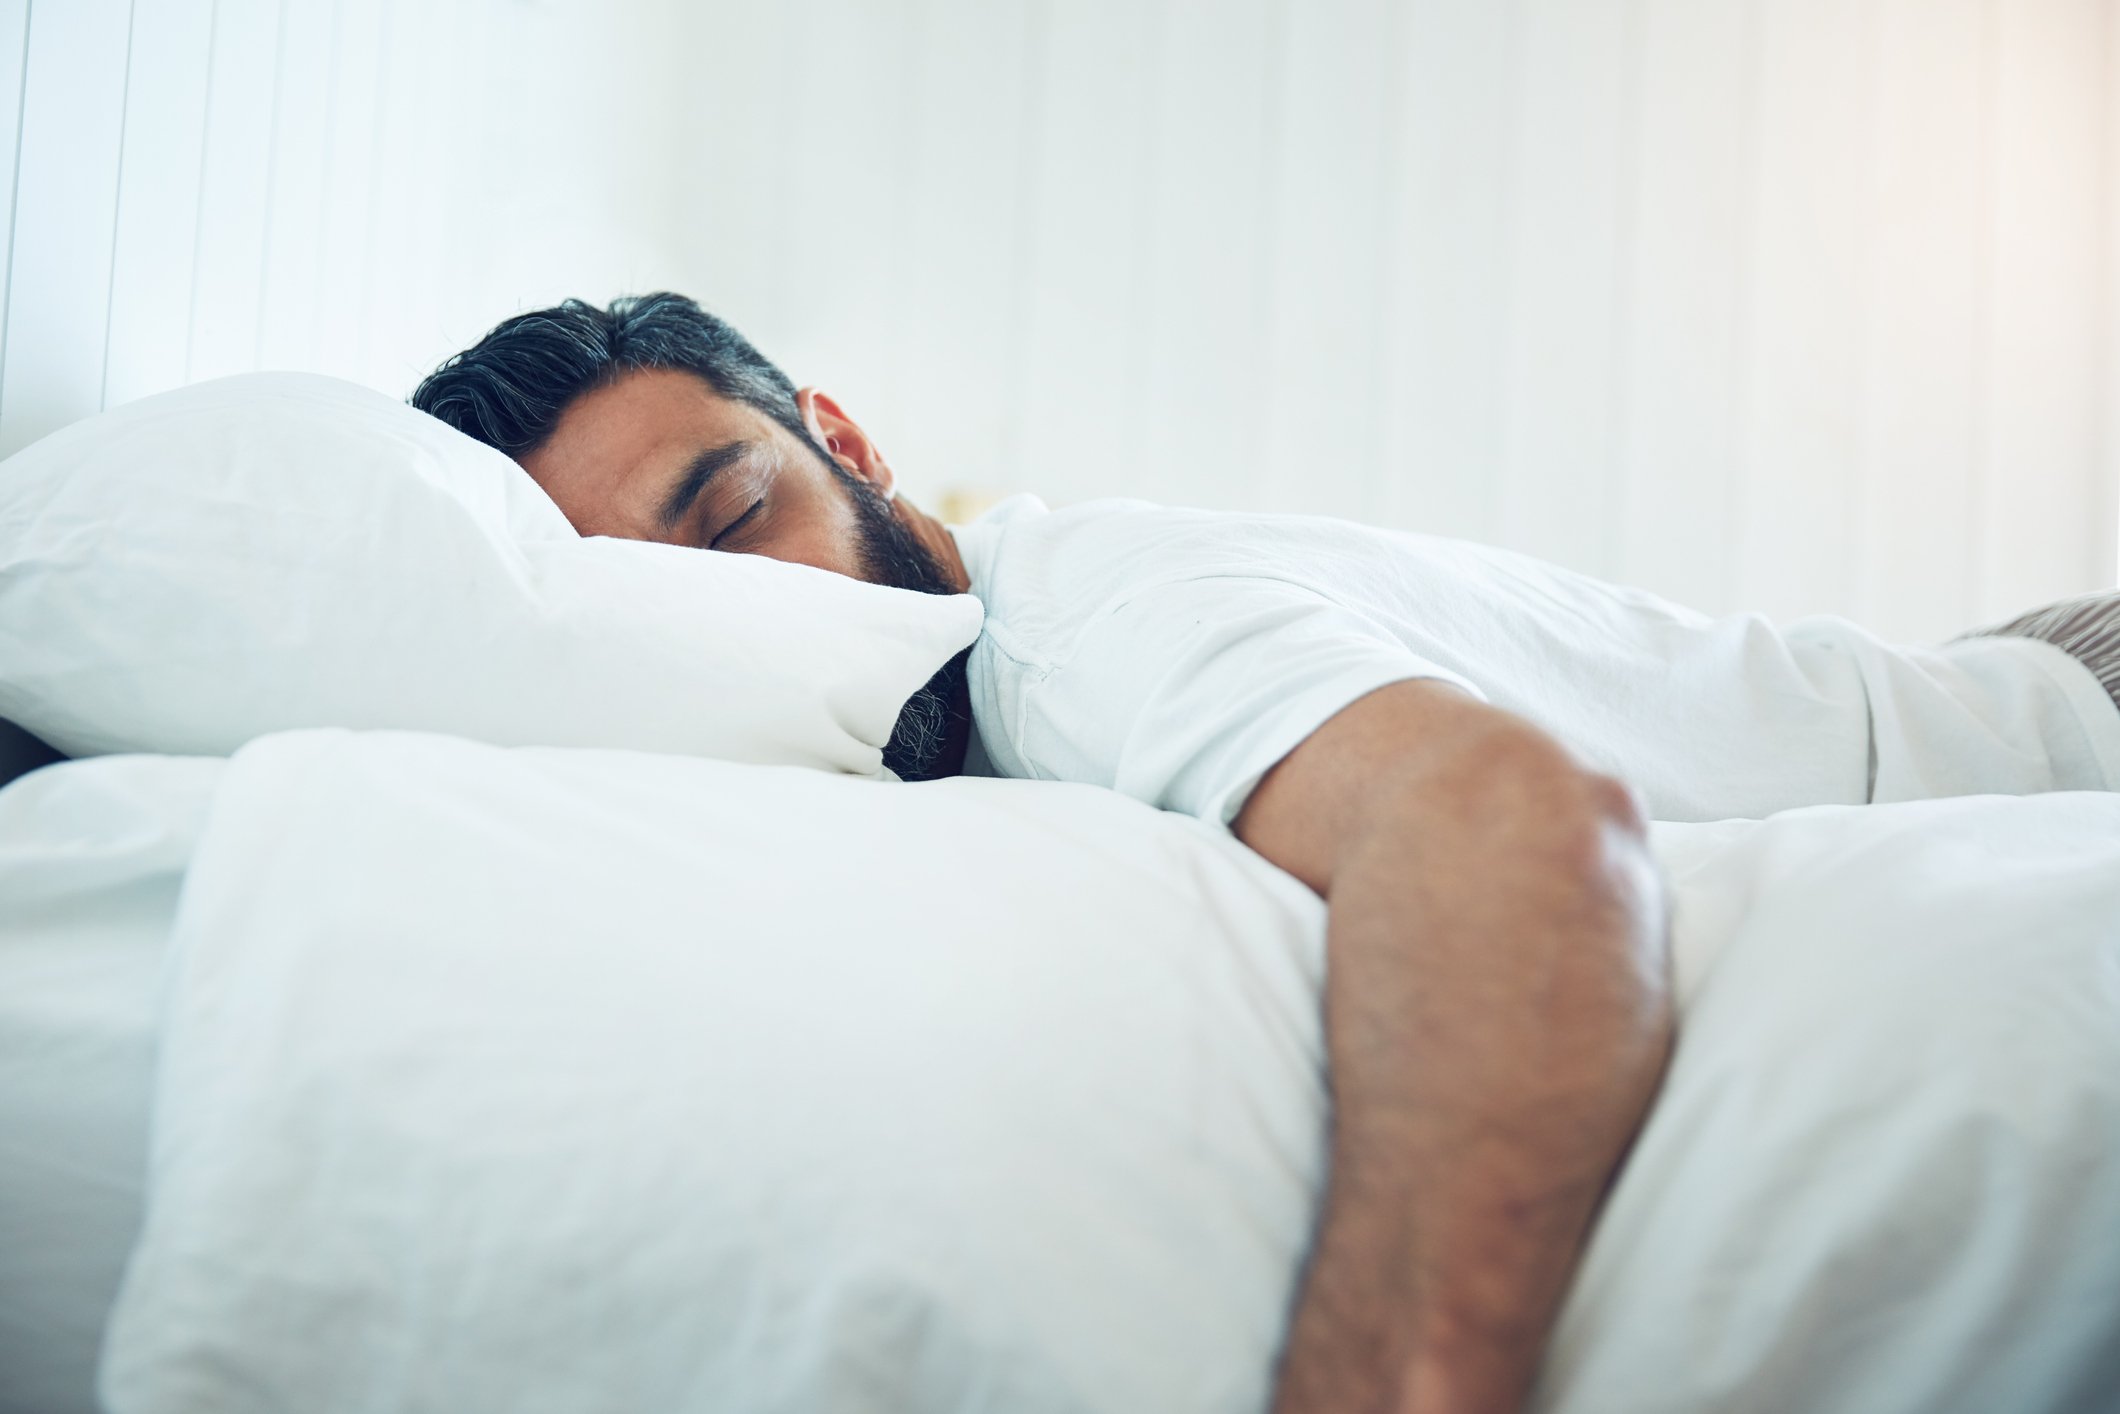 Is it bad to sleep on your stomach? In a nutshell, yes